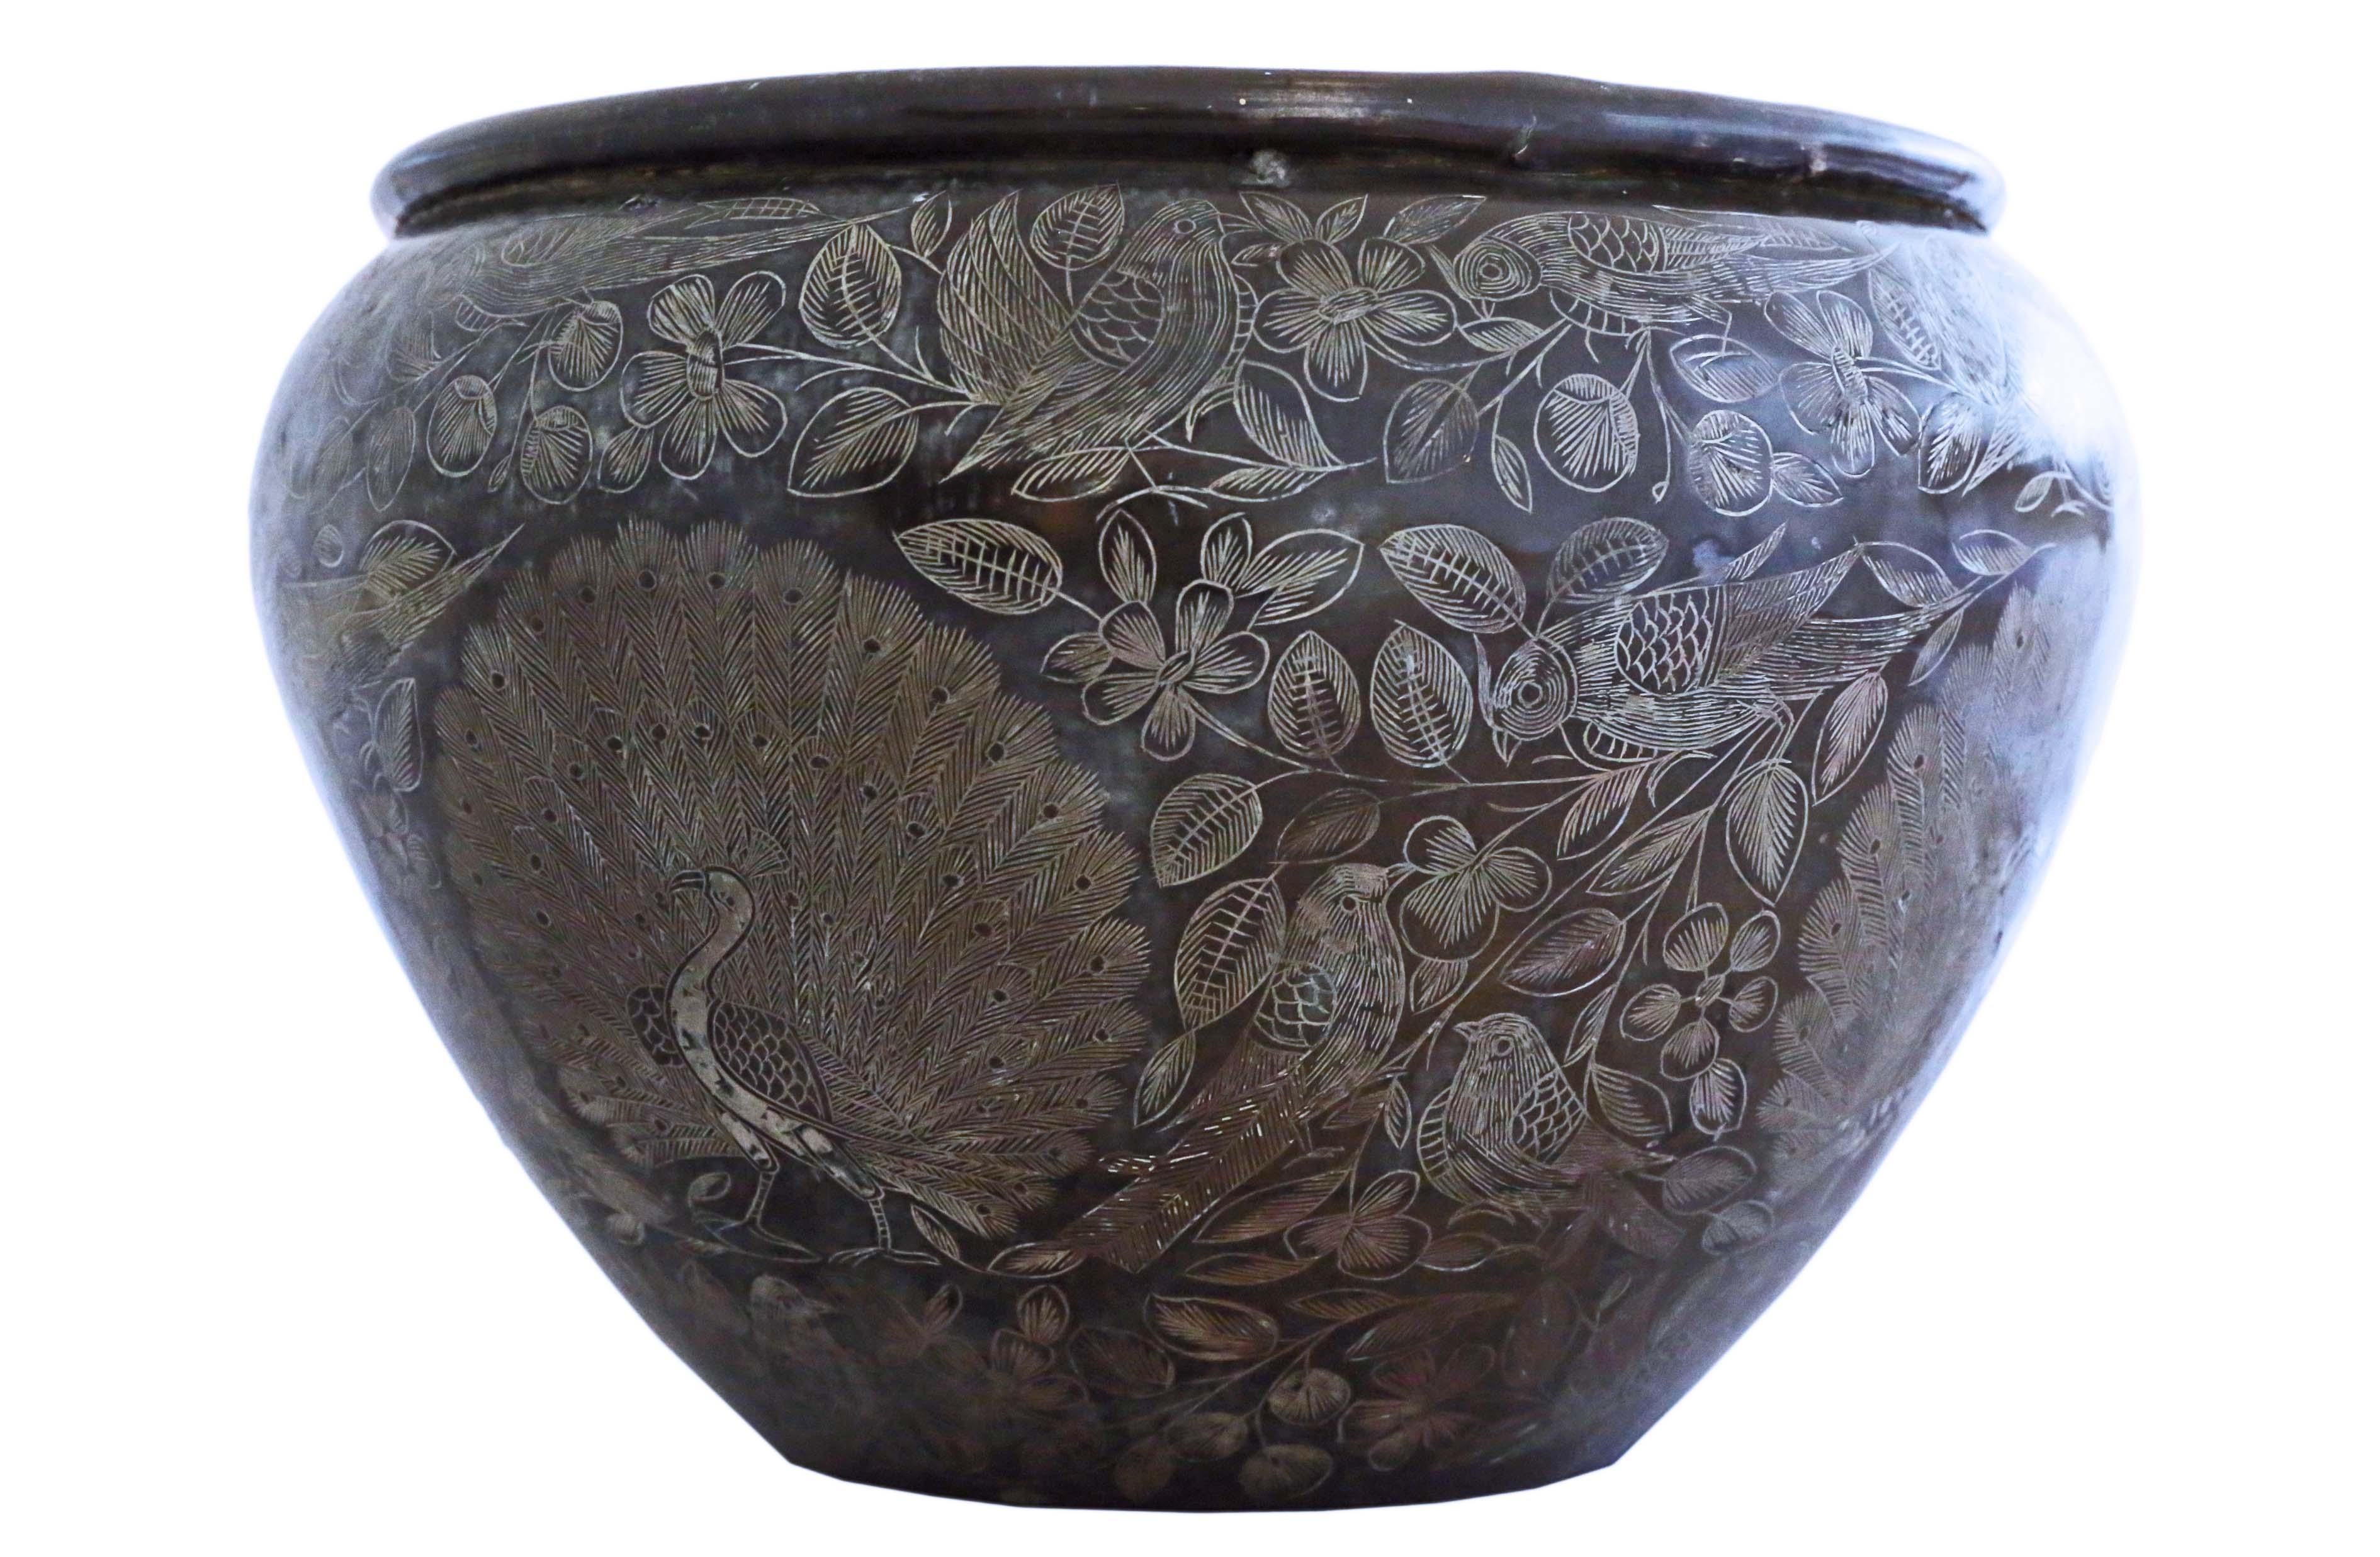 Antique quality Oriental Japanese or Chinese bronze Jardinière planter bowl early 20th Century.

Would look amazing in the right location. Great colour, age and patina.

Overall maximum dimensions: 30cm diameter x 21cm high. Mouth diameter 23cm.